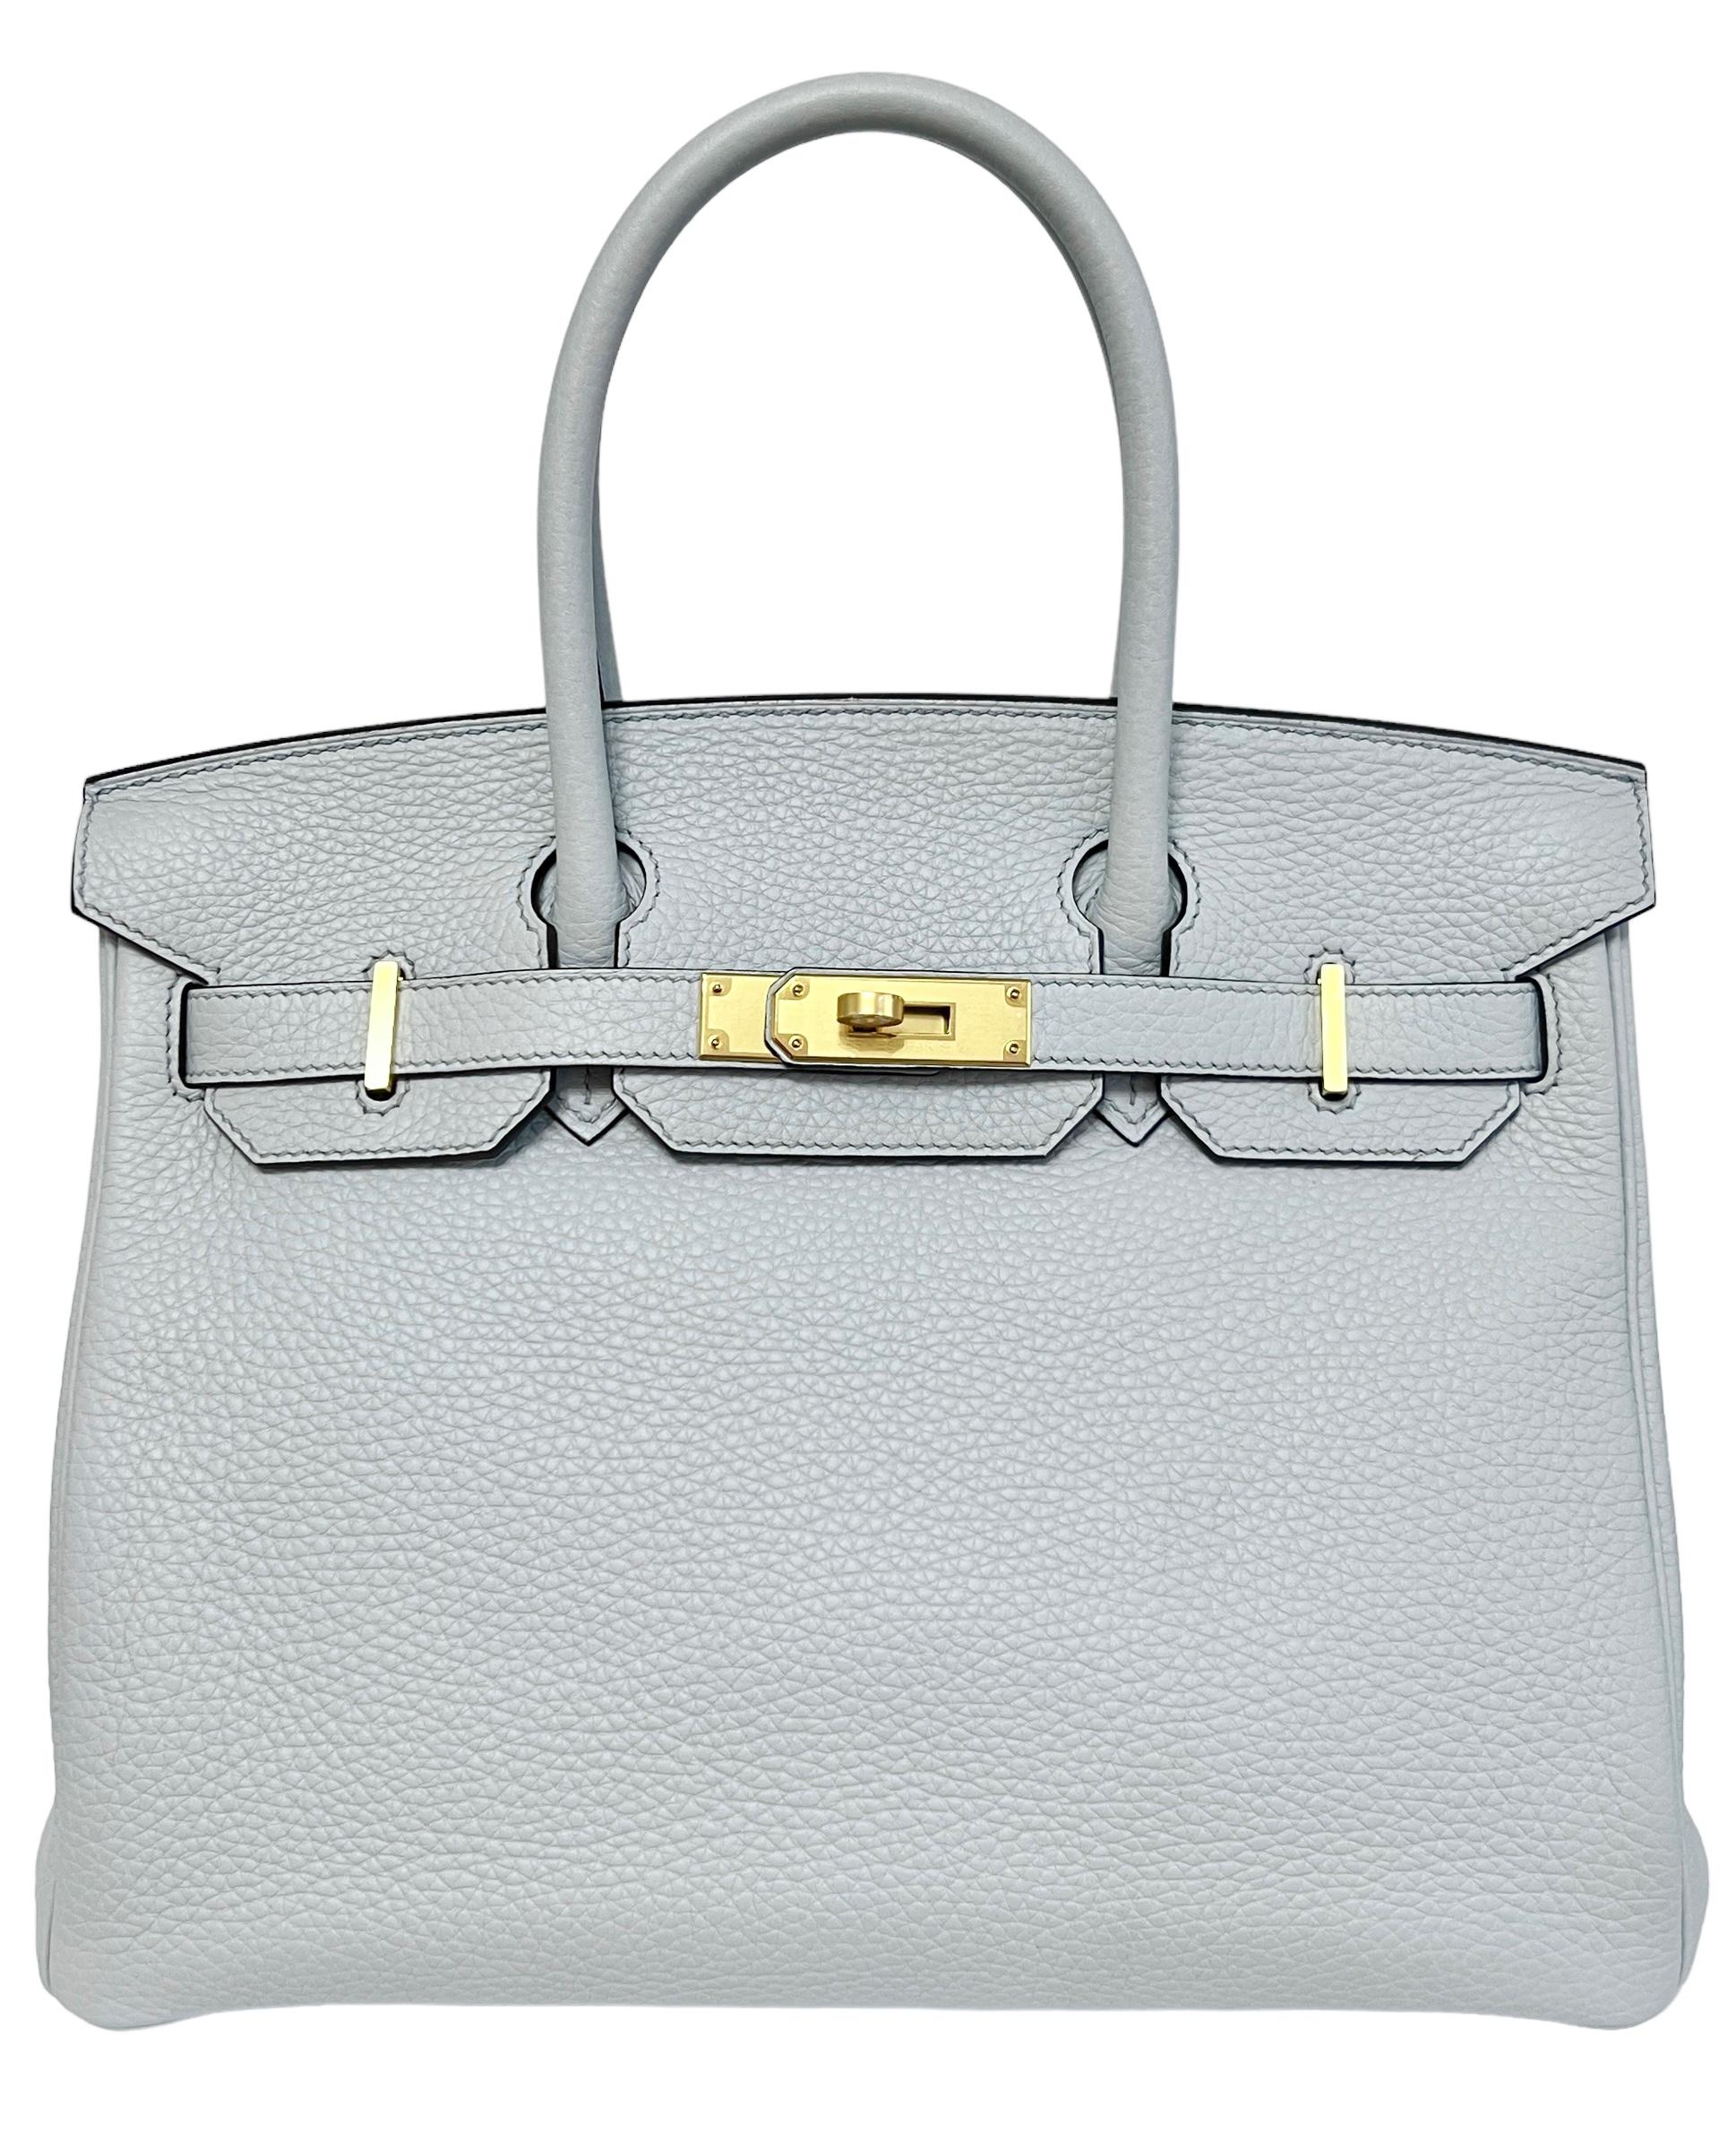 Stunning Rare Hermes Birkin 30 Gris Mouette Absolutely Stunning As New 2020 Hermes Birkin 30 Blue Pale Leather complimented by Gold Hardware. As New Plastic on all Hardware and Feet. Y Stamp 2020. Please Note, the bag has extremely minor